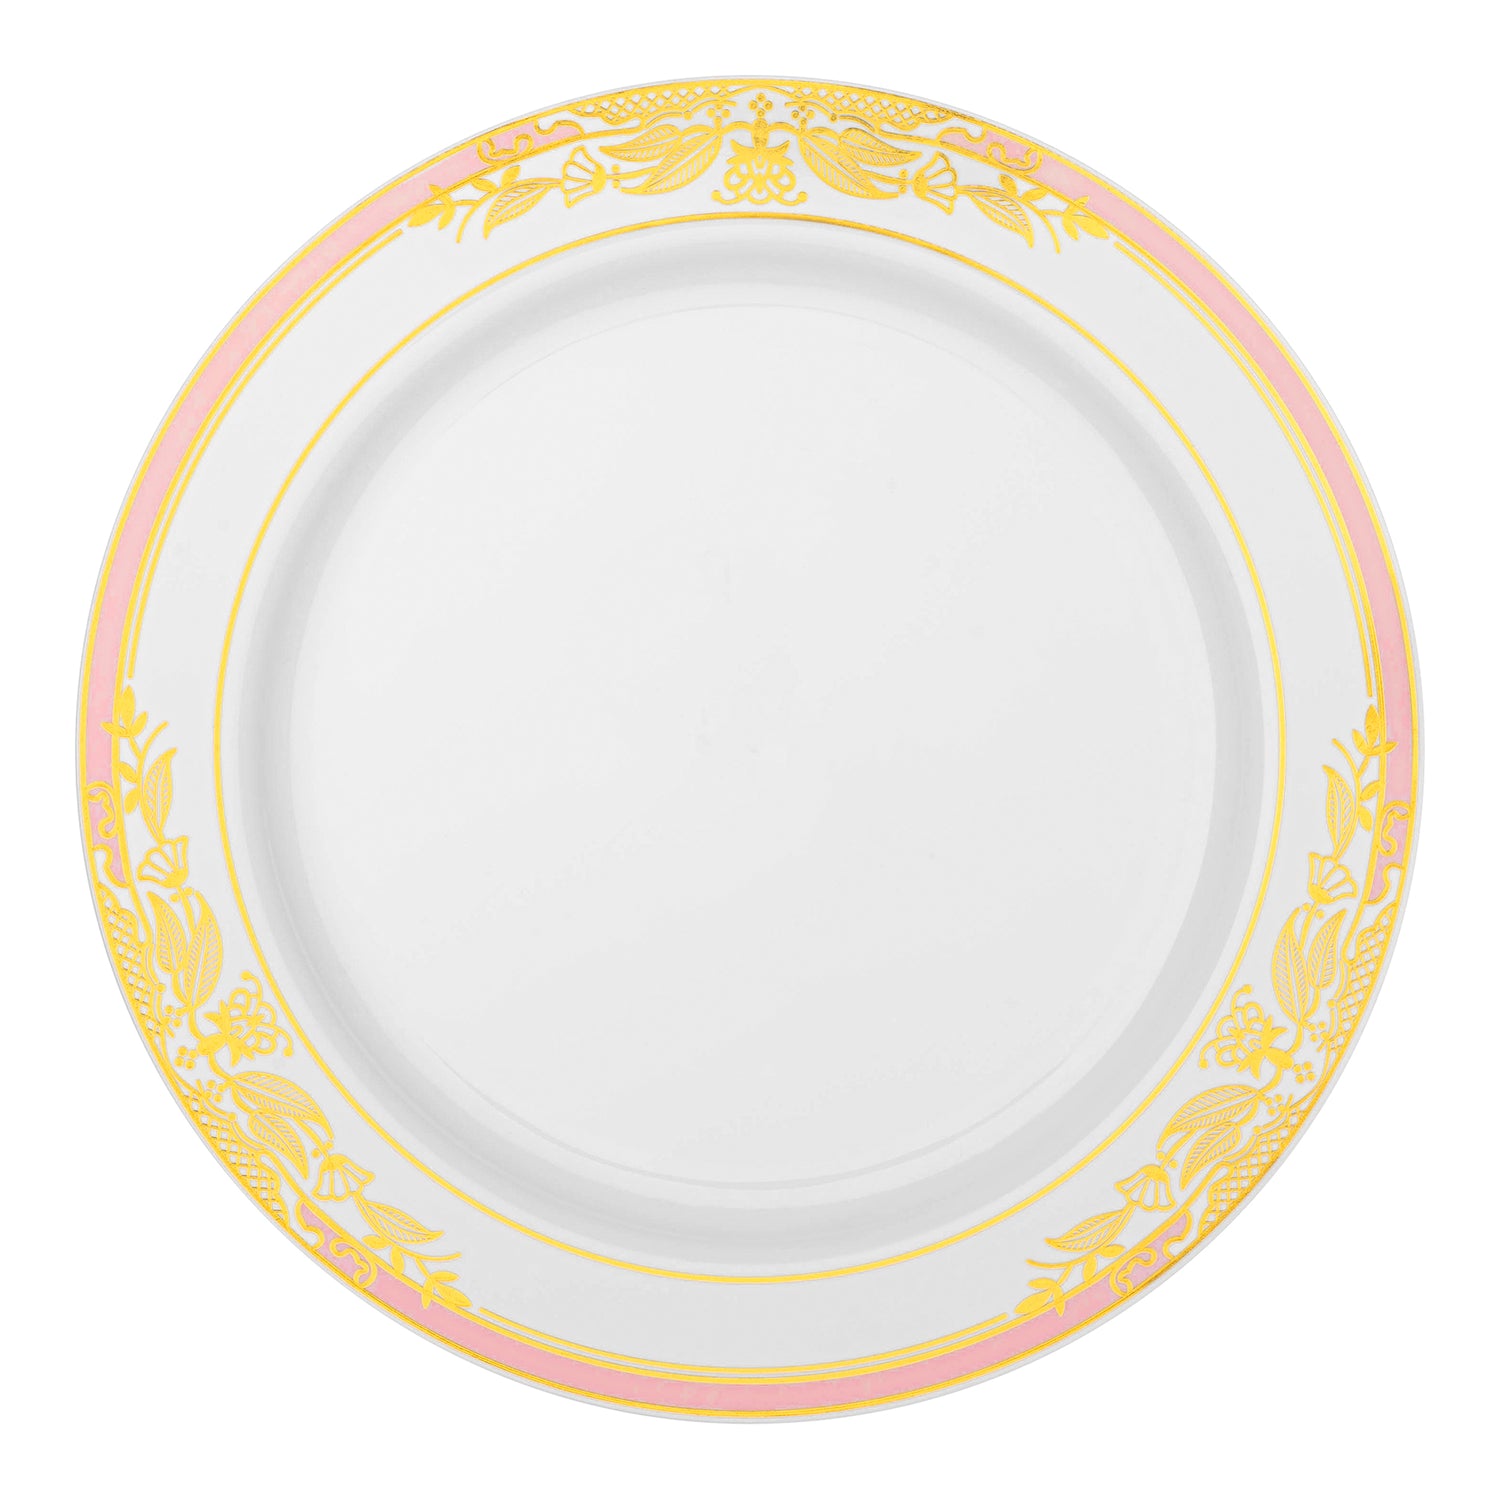 White with Pink and Gold Harmony Rim Disposable Plastic Dinner Plates (10.25") Secondary | Smarty Had A Party